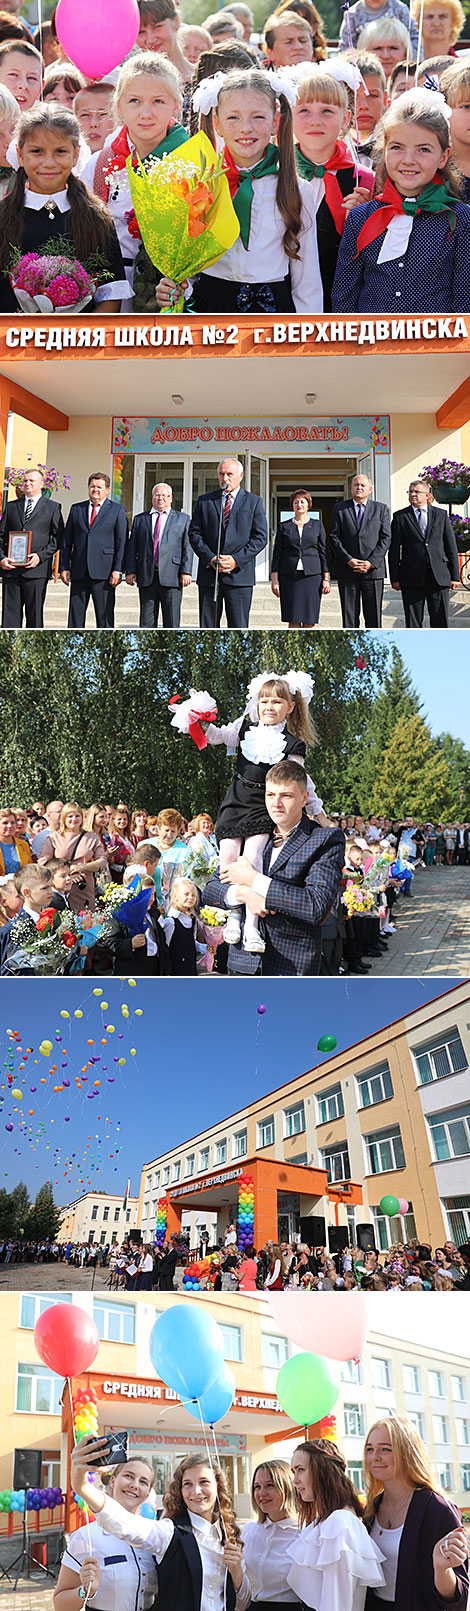 The School of the Future: Secondary School No. 2 reopens in Verkhnedvinsk after major renovations 